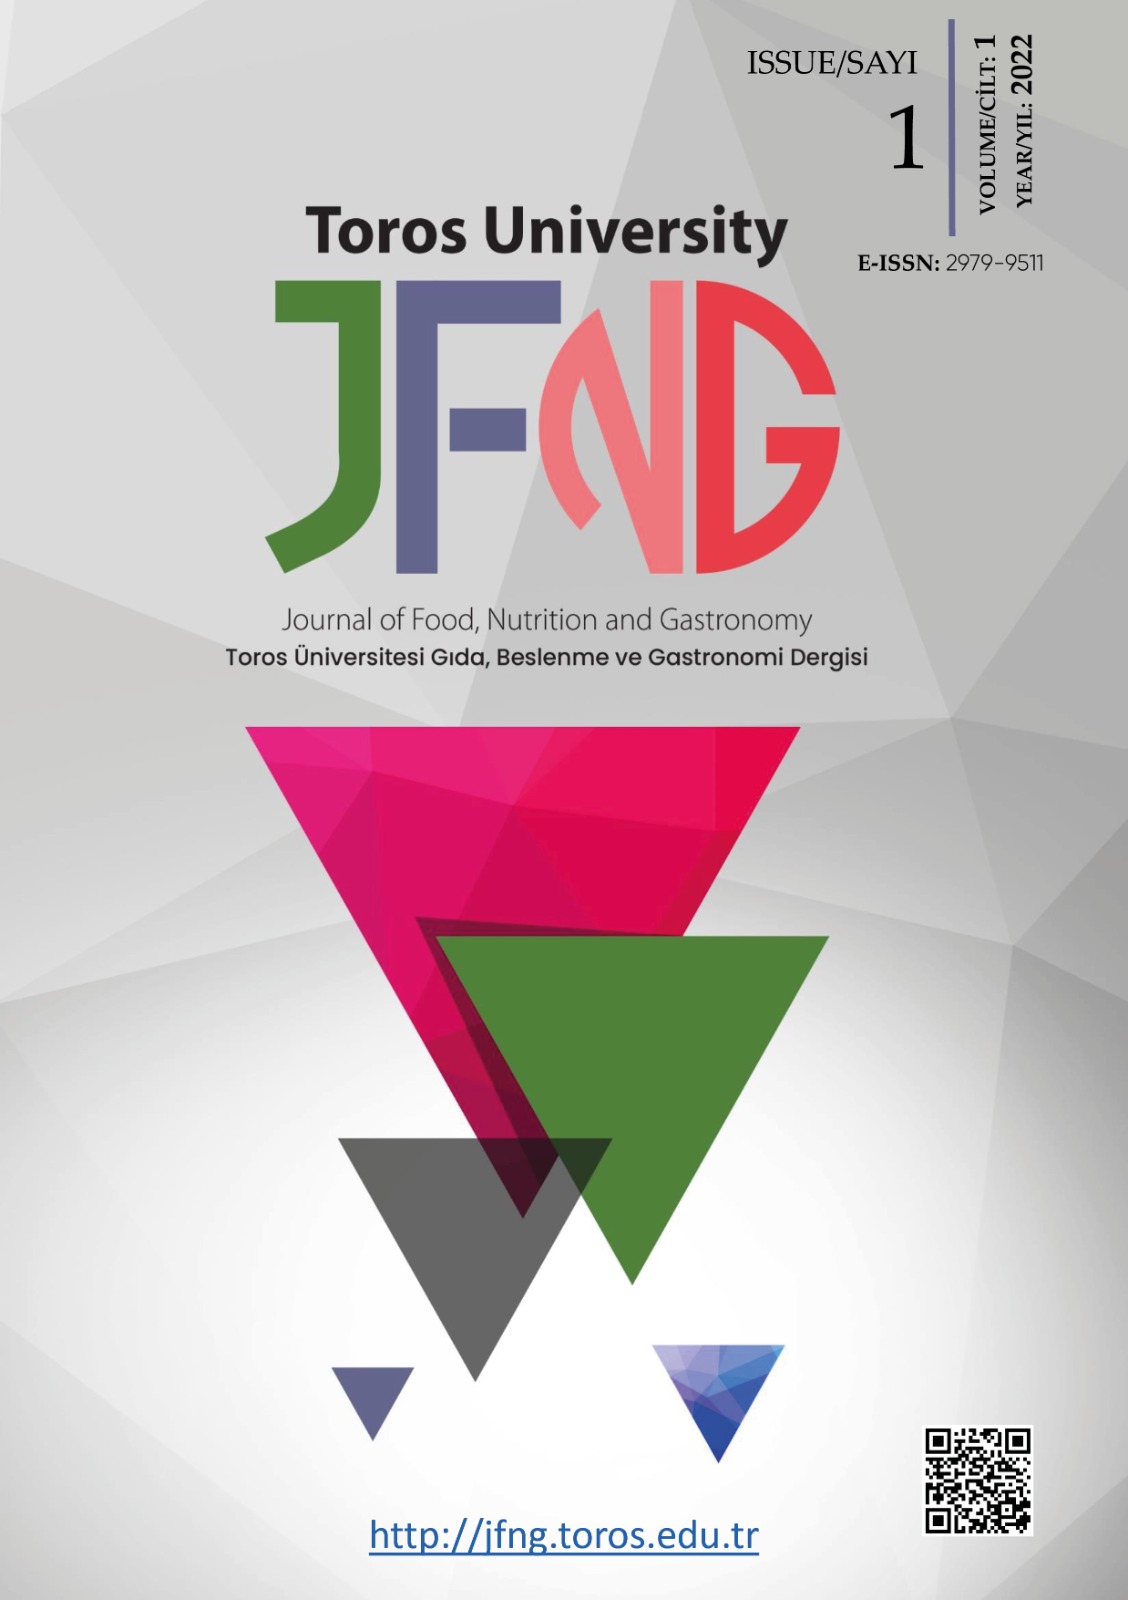 Toros University Journal of Food, Nutrition and Gastronomy